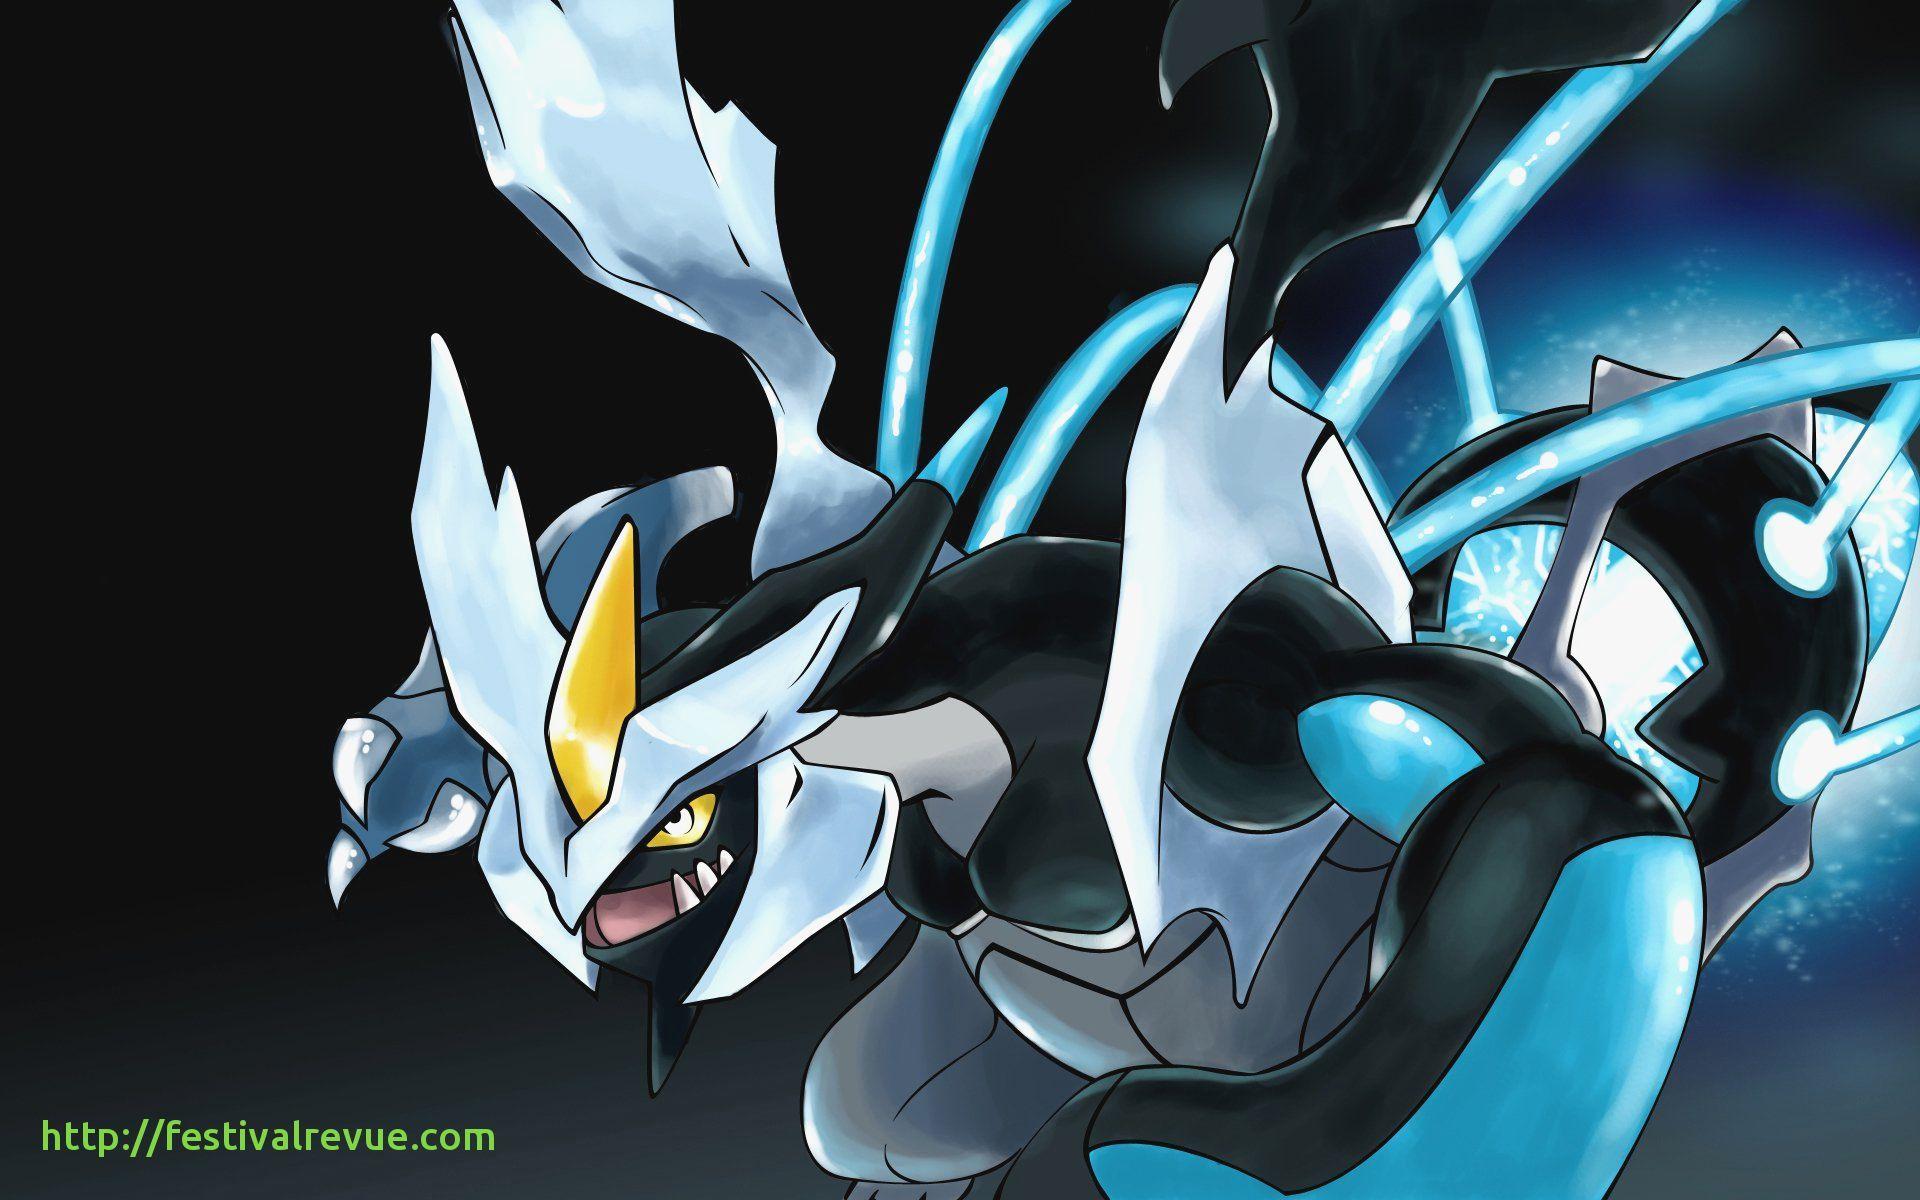 Inspirational White Kyurem Wallpaper and 6 Picture